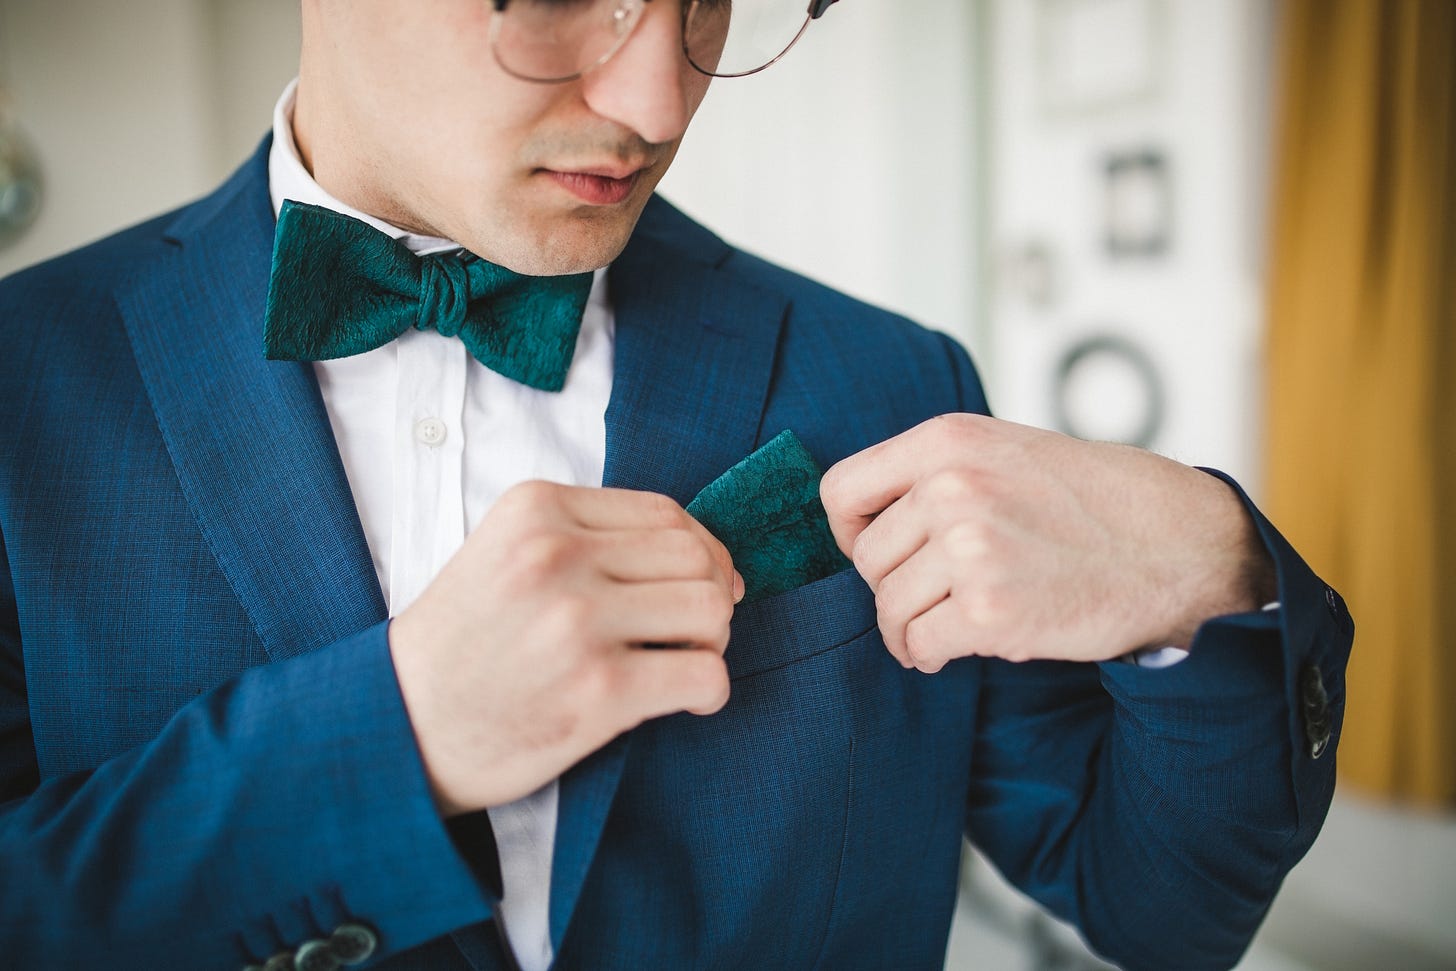 A young man in a suit fixes his pocket square.